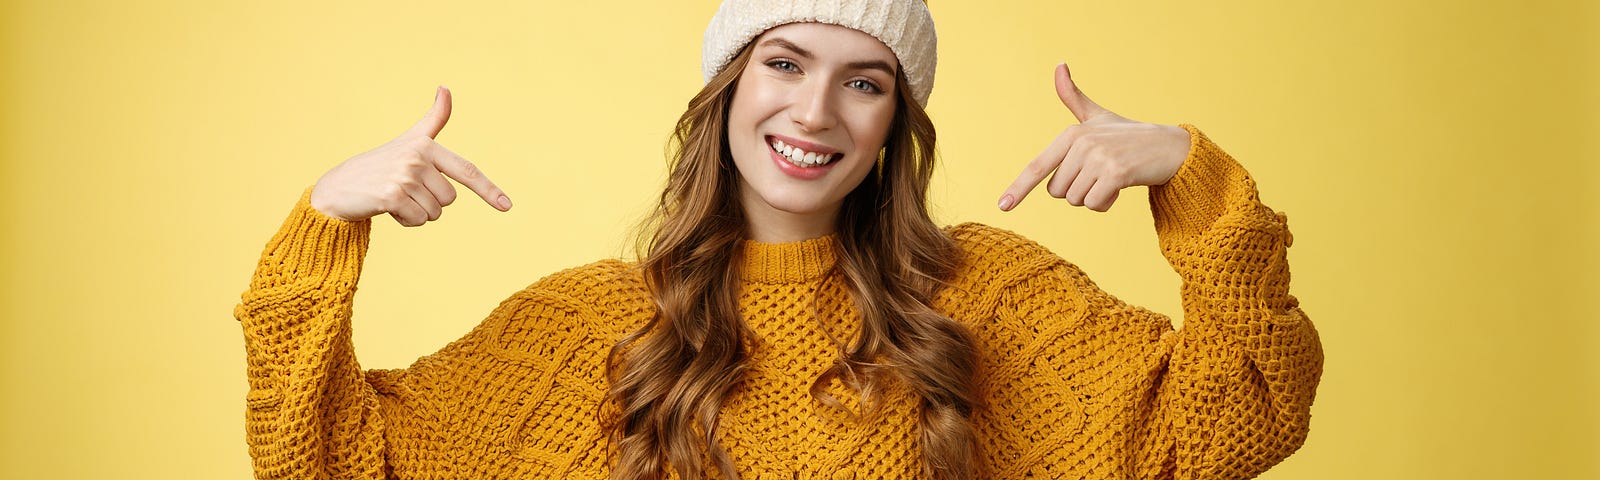 Young woman in gold sweater and jeans pointing to herself as a winner.